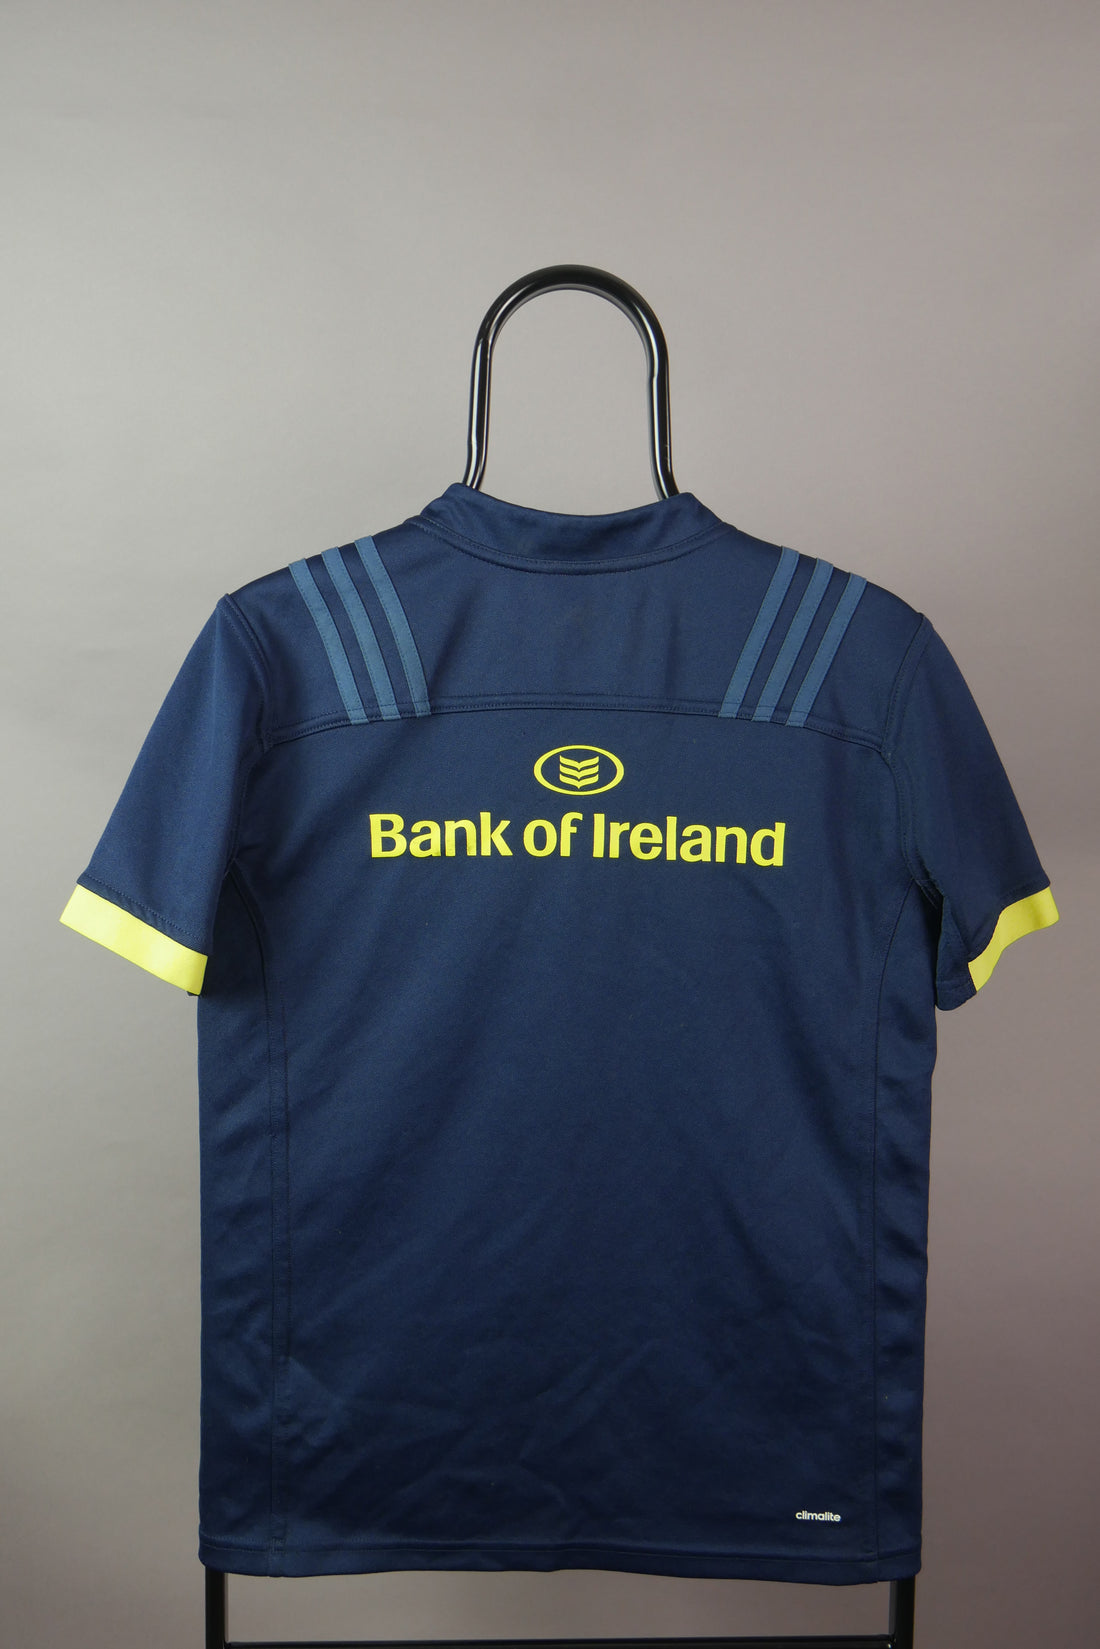 The Adidas Munster Rugby T-Shirt (XS)